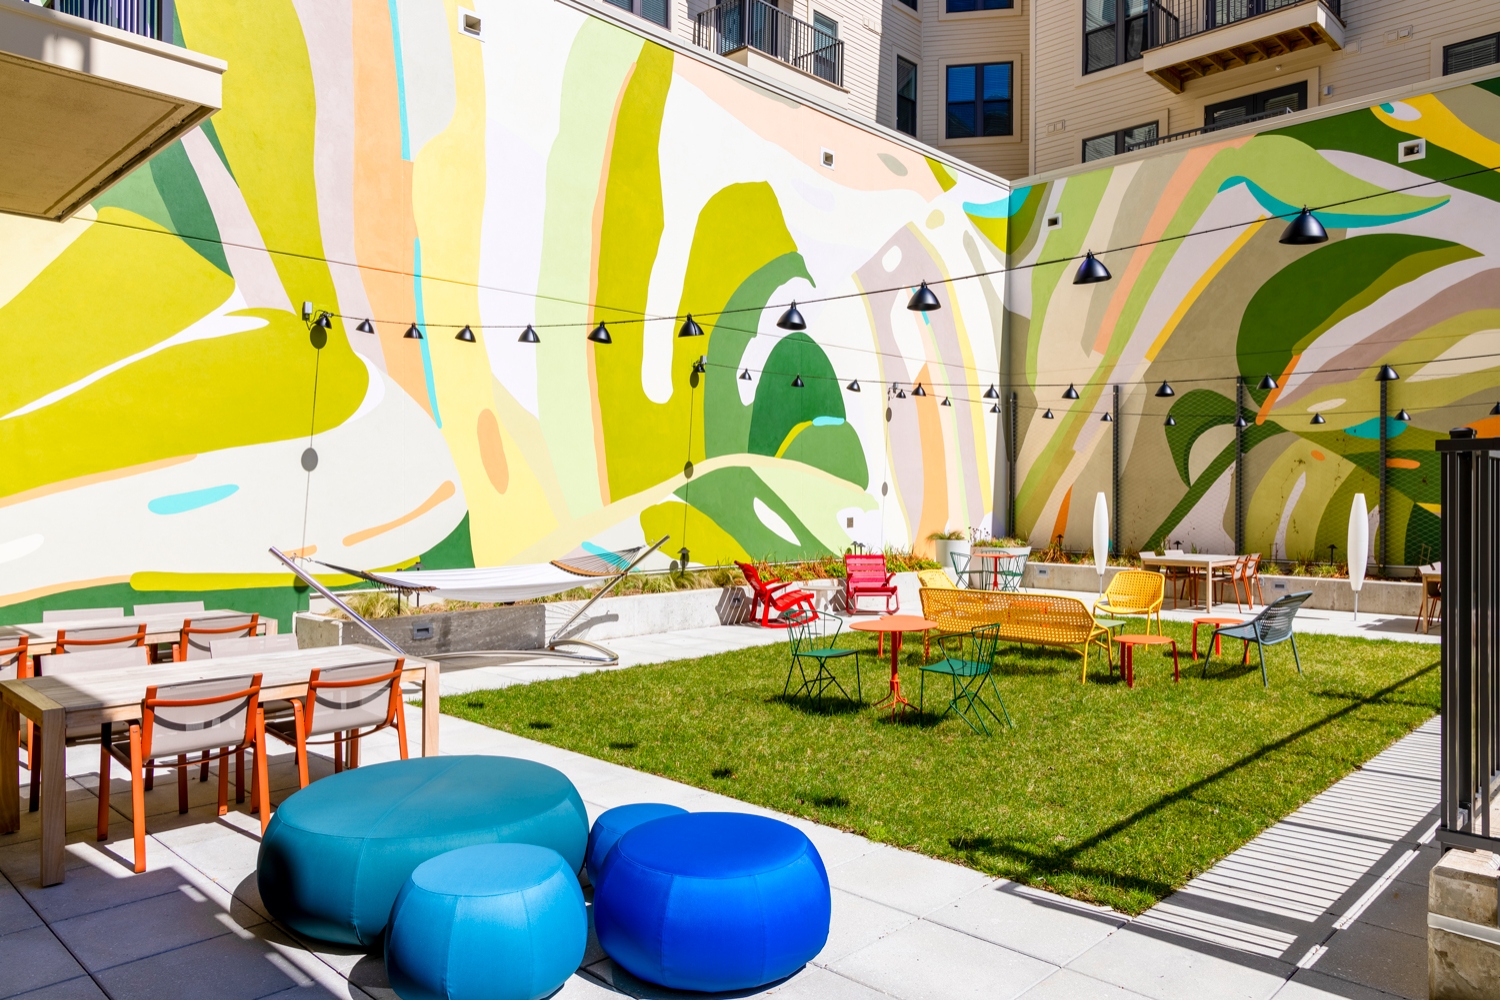 The Vale : Hang out and snap a selfie in front of our colorful courtyard mural. 